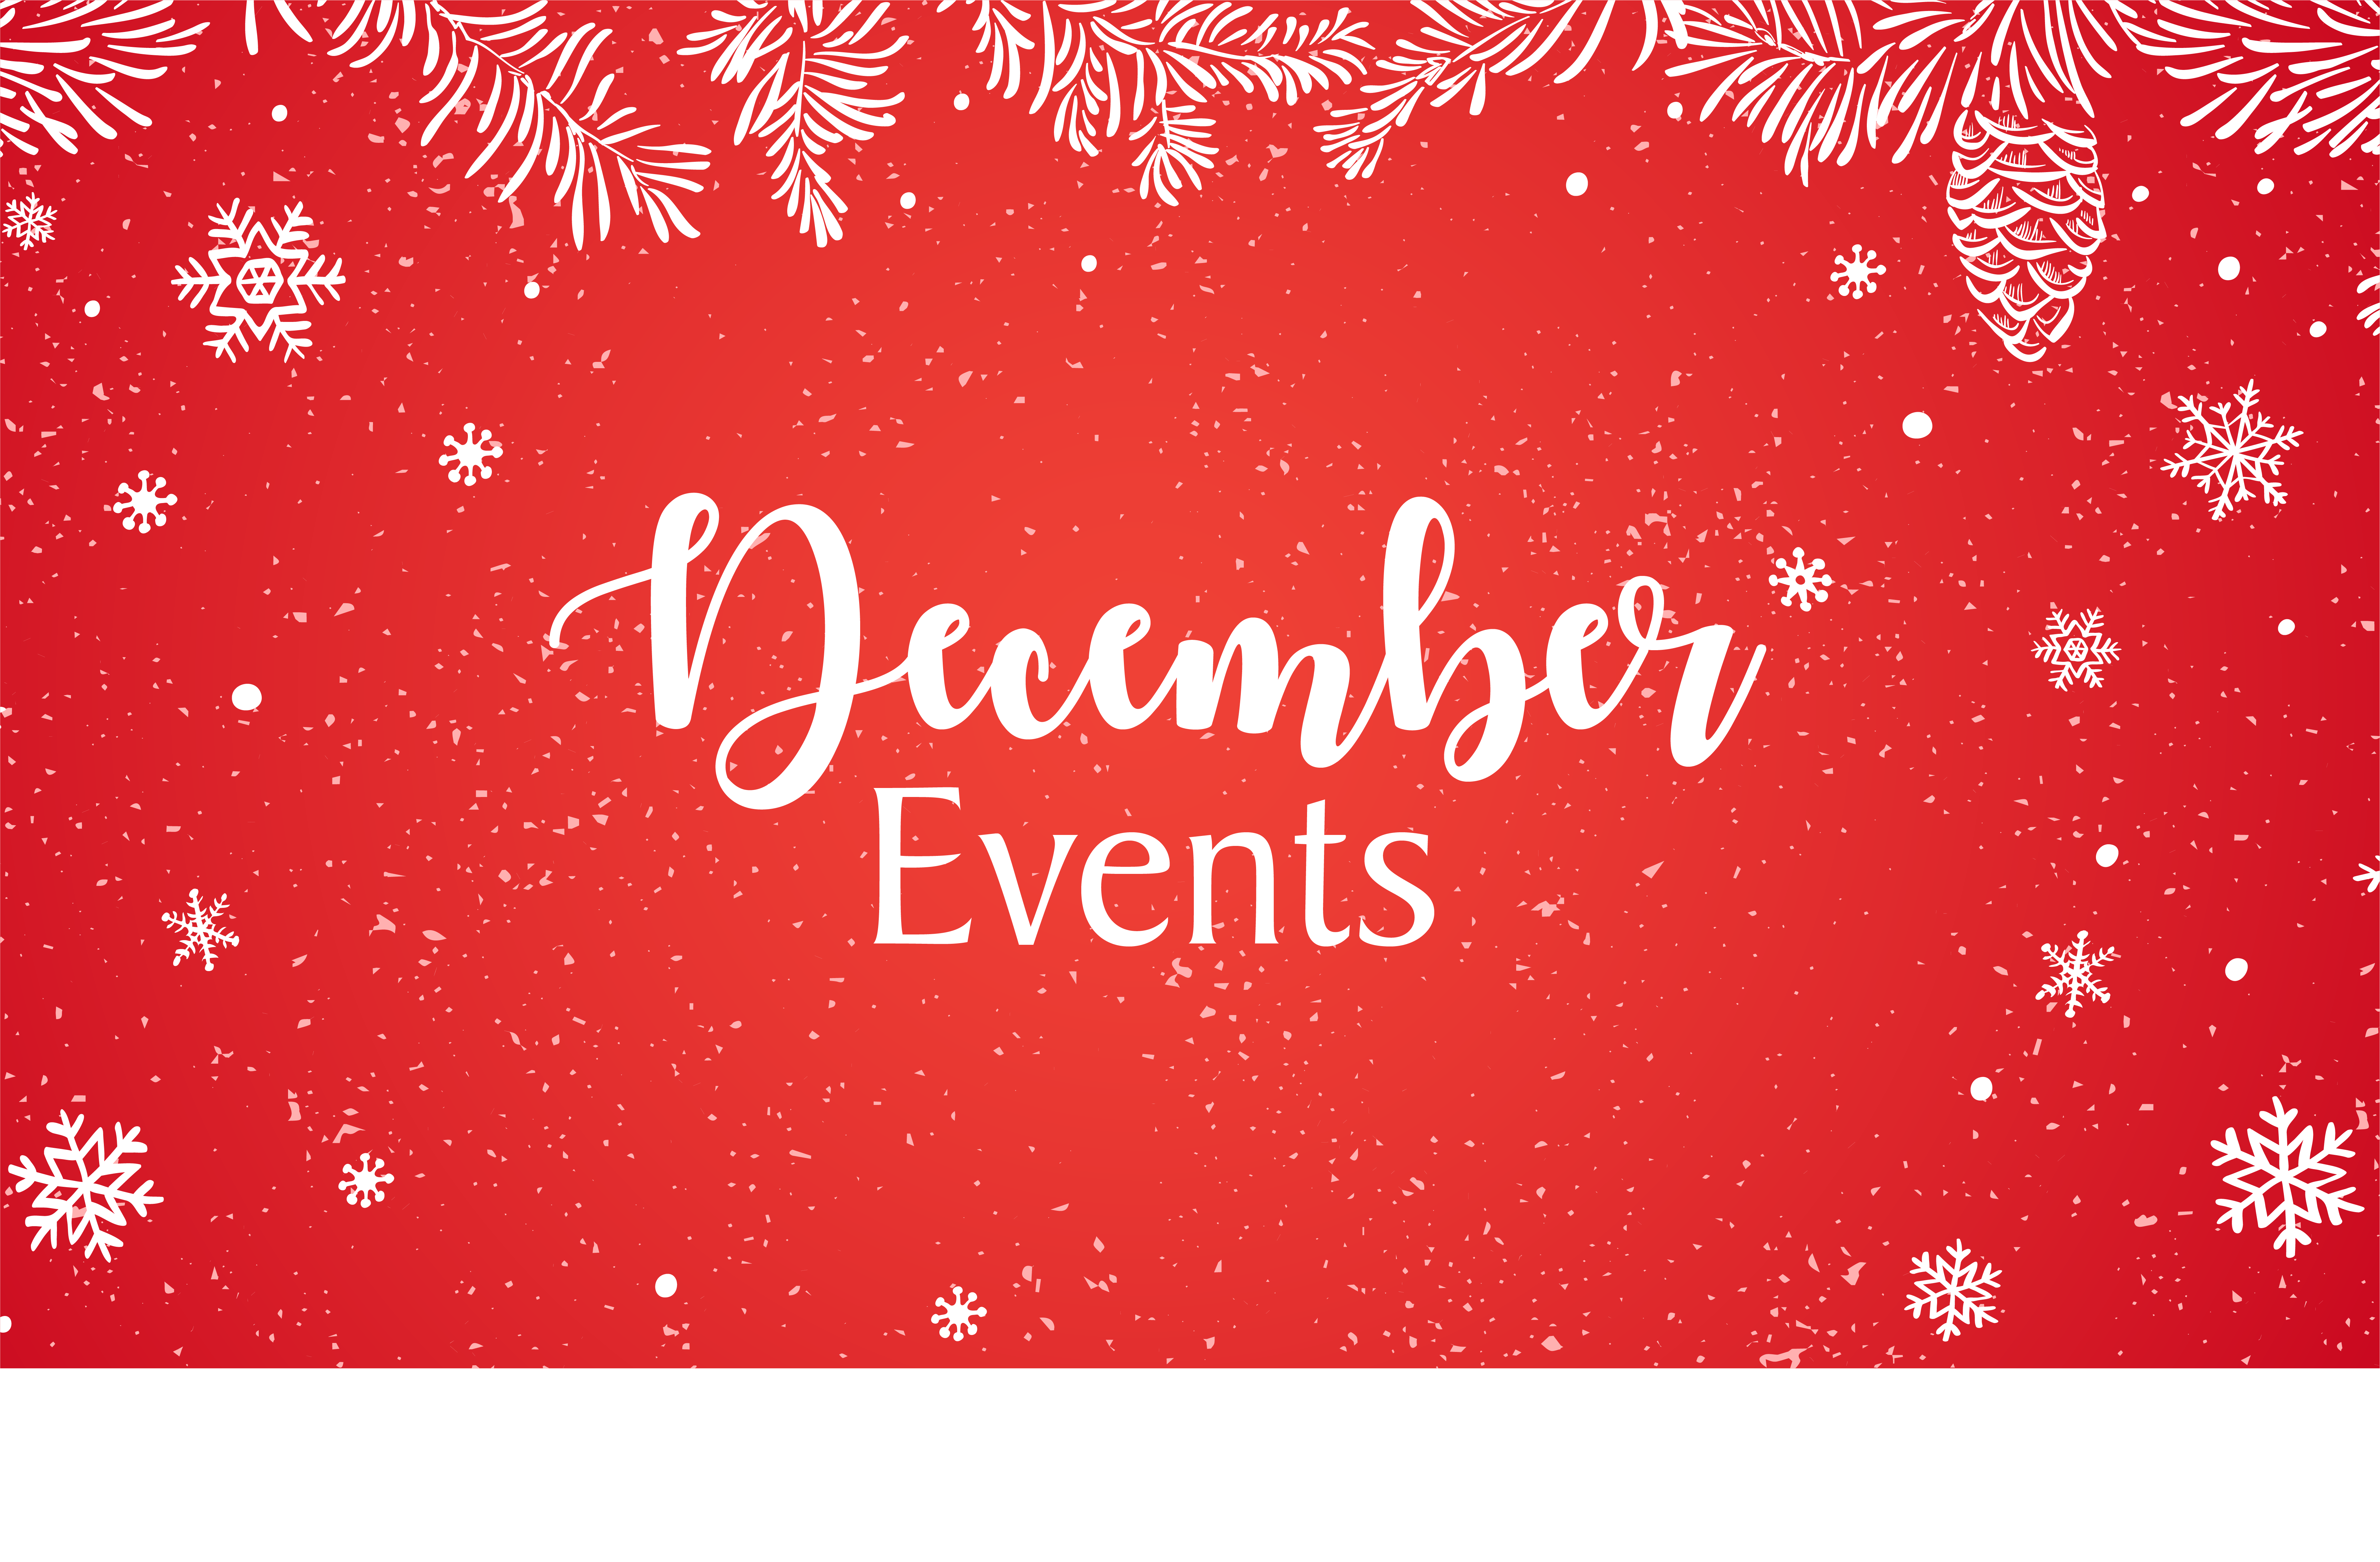 Upcoming Events in Lakemont